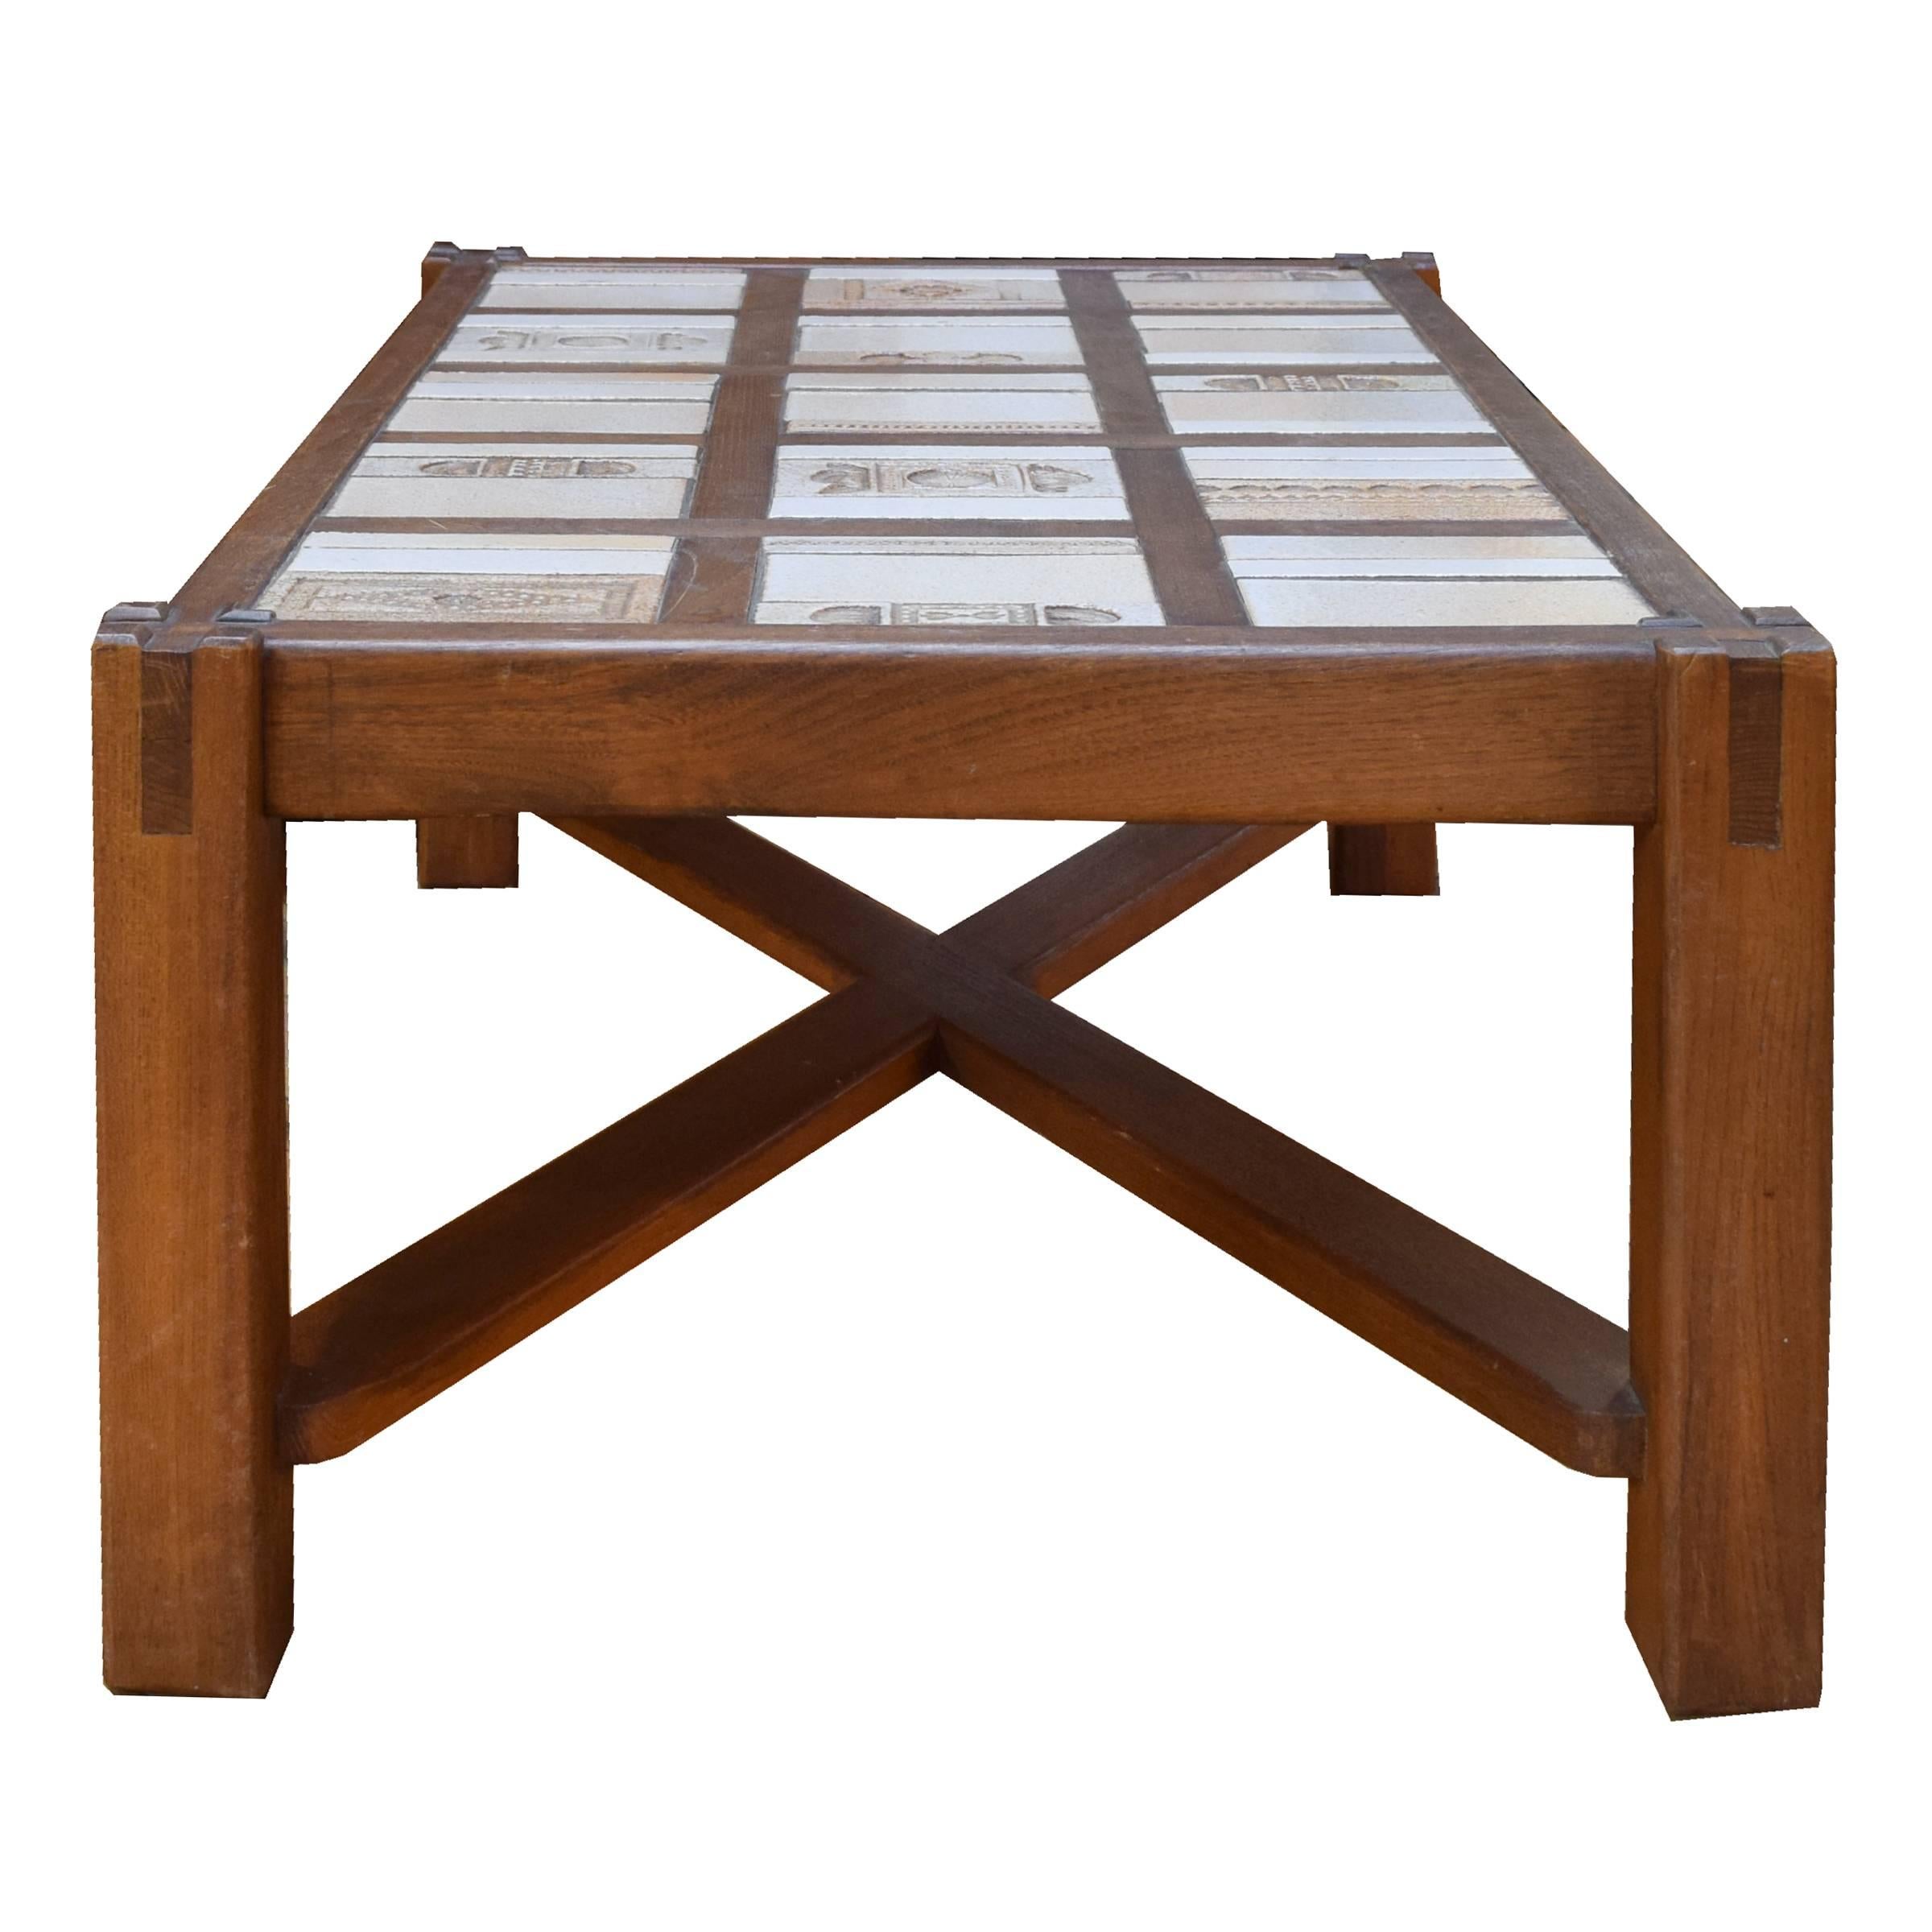 A great mid-century wood coffee table with crossed stretchers and a tile top with stamped geometric and floral patterns.